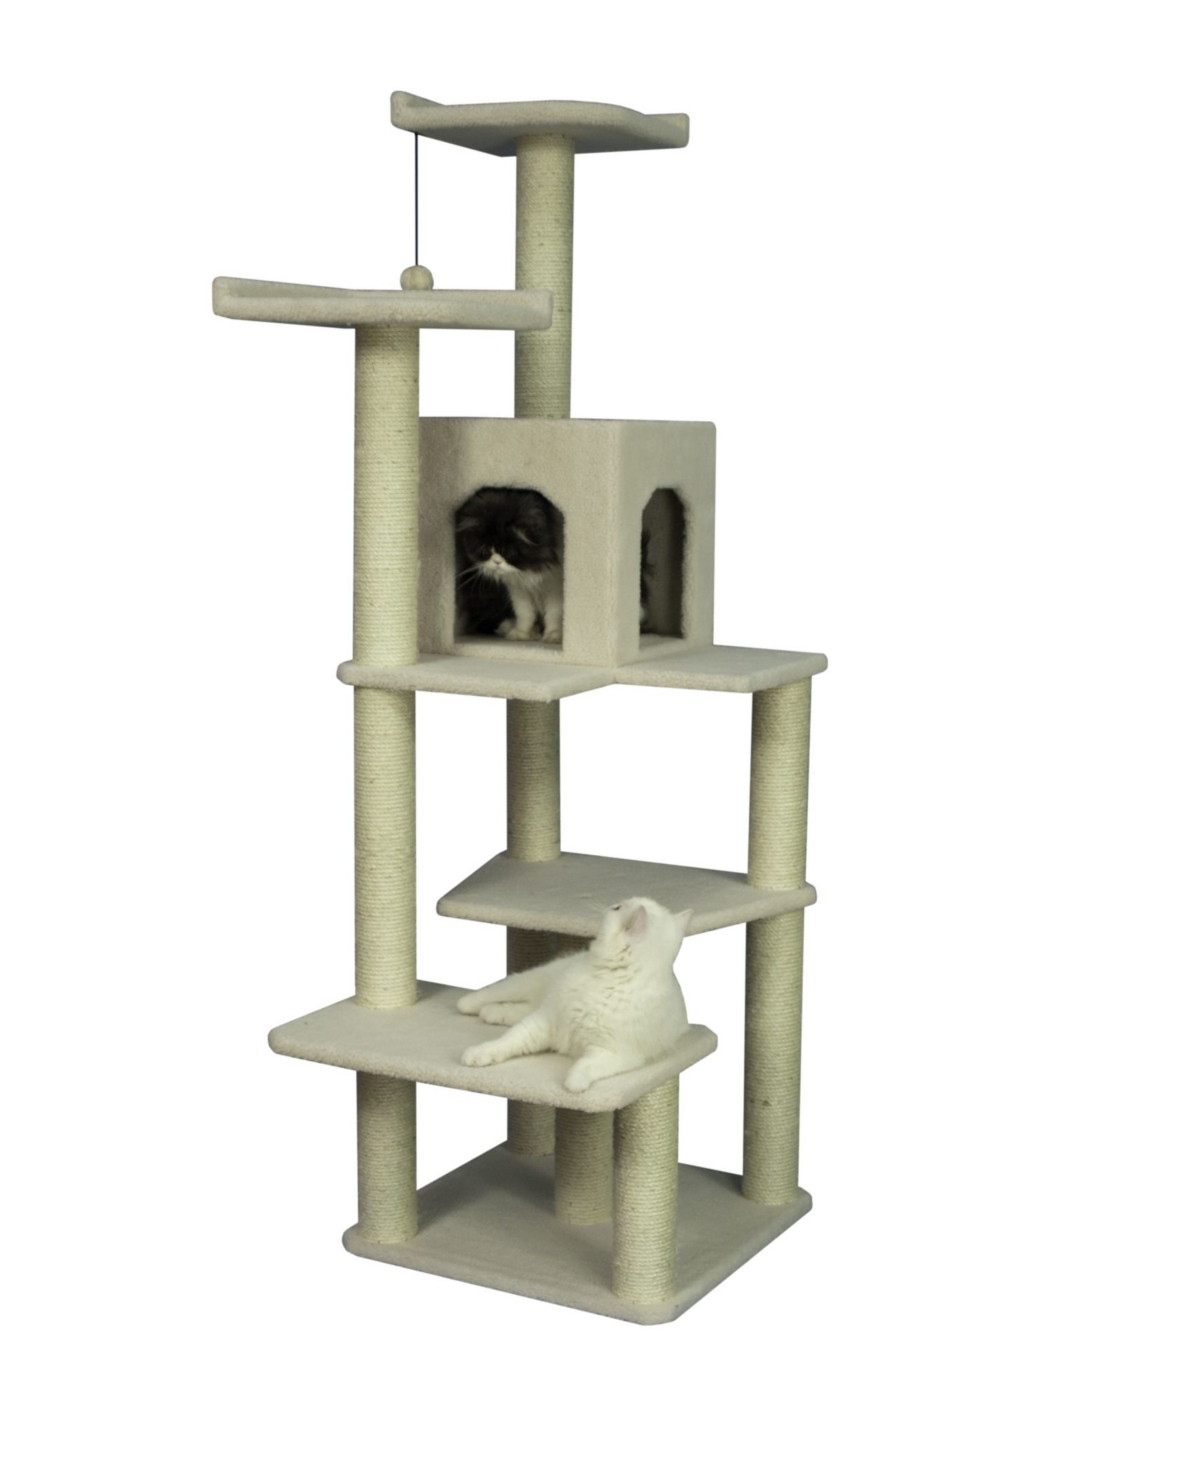 Real Wood 6-Level Cat Tree, With Condo and Two Perches - Ivory